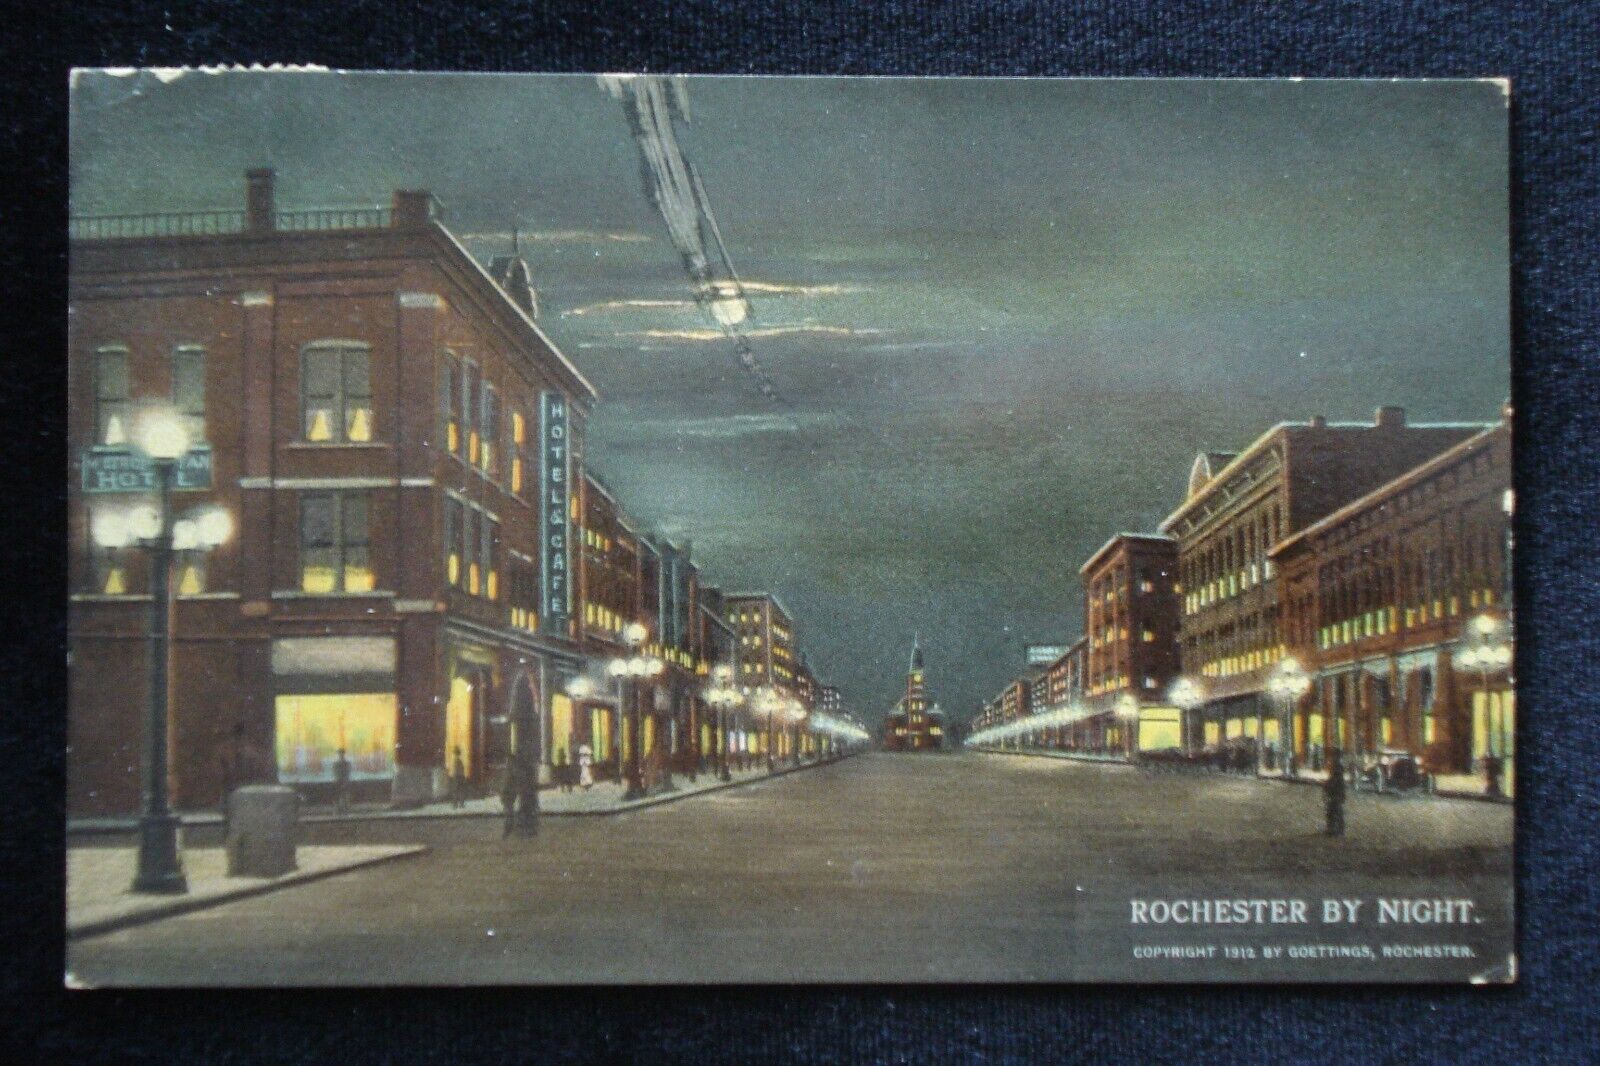 1912 ROCHESTER MN NIGHT VIEW DOWNTOWN MOONLIT STREET SCENE PC ~ INTERESTING NOTE